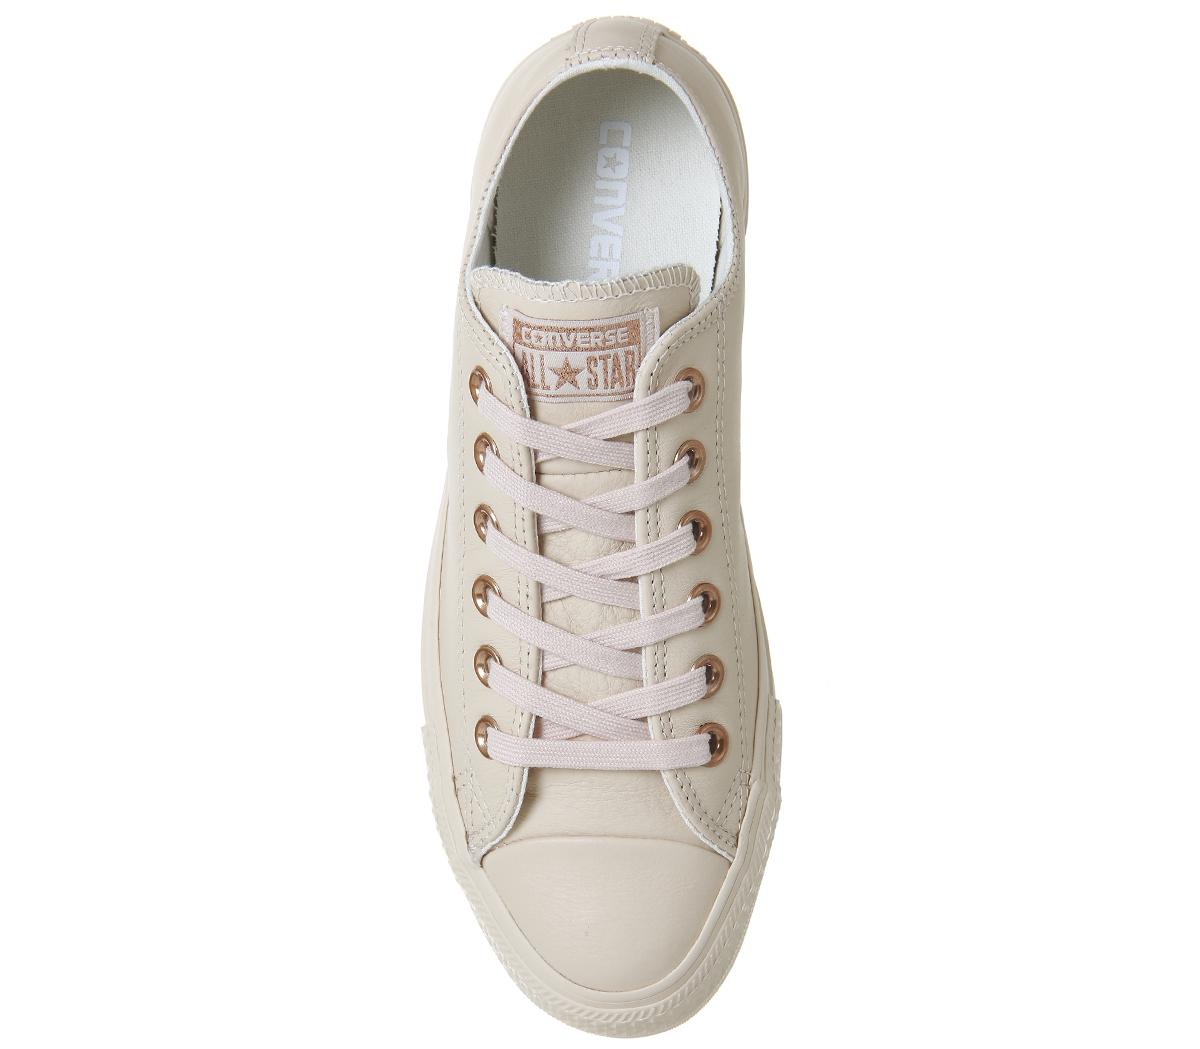 Converse All Star Low Leather Pastel Rose Tan Rose Gold - Hers trainers